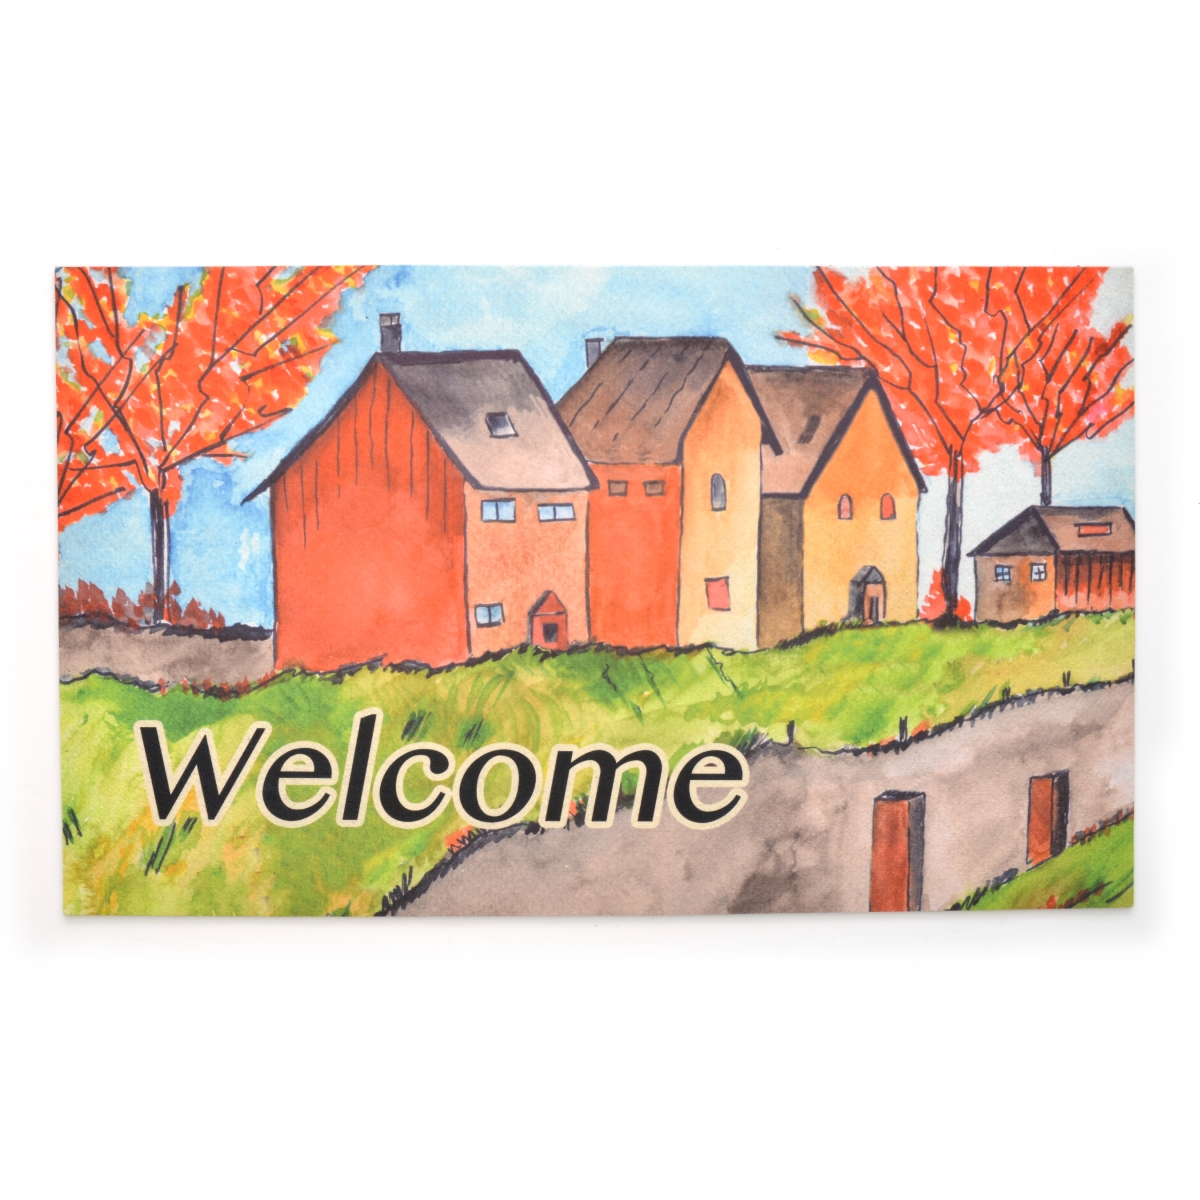 Strb-15805-12 18 X 30 In. Crumb Rubber Door Mat, Cottages In The Fall